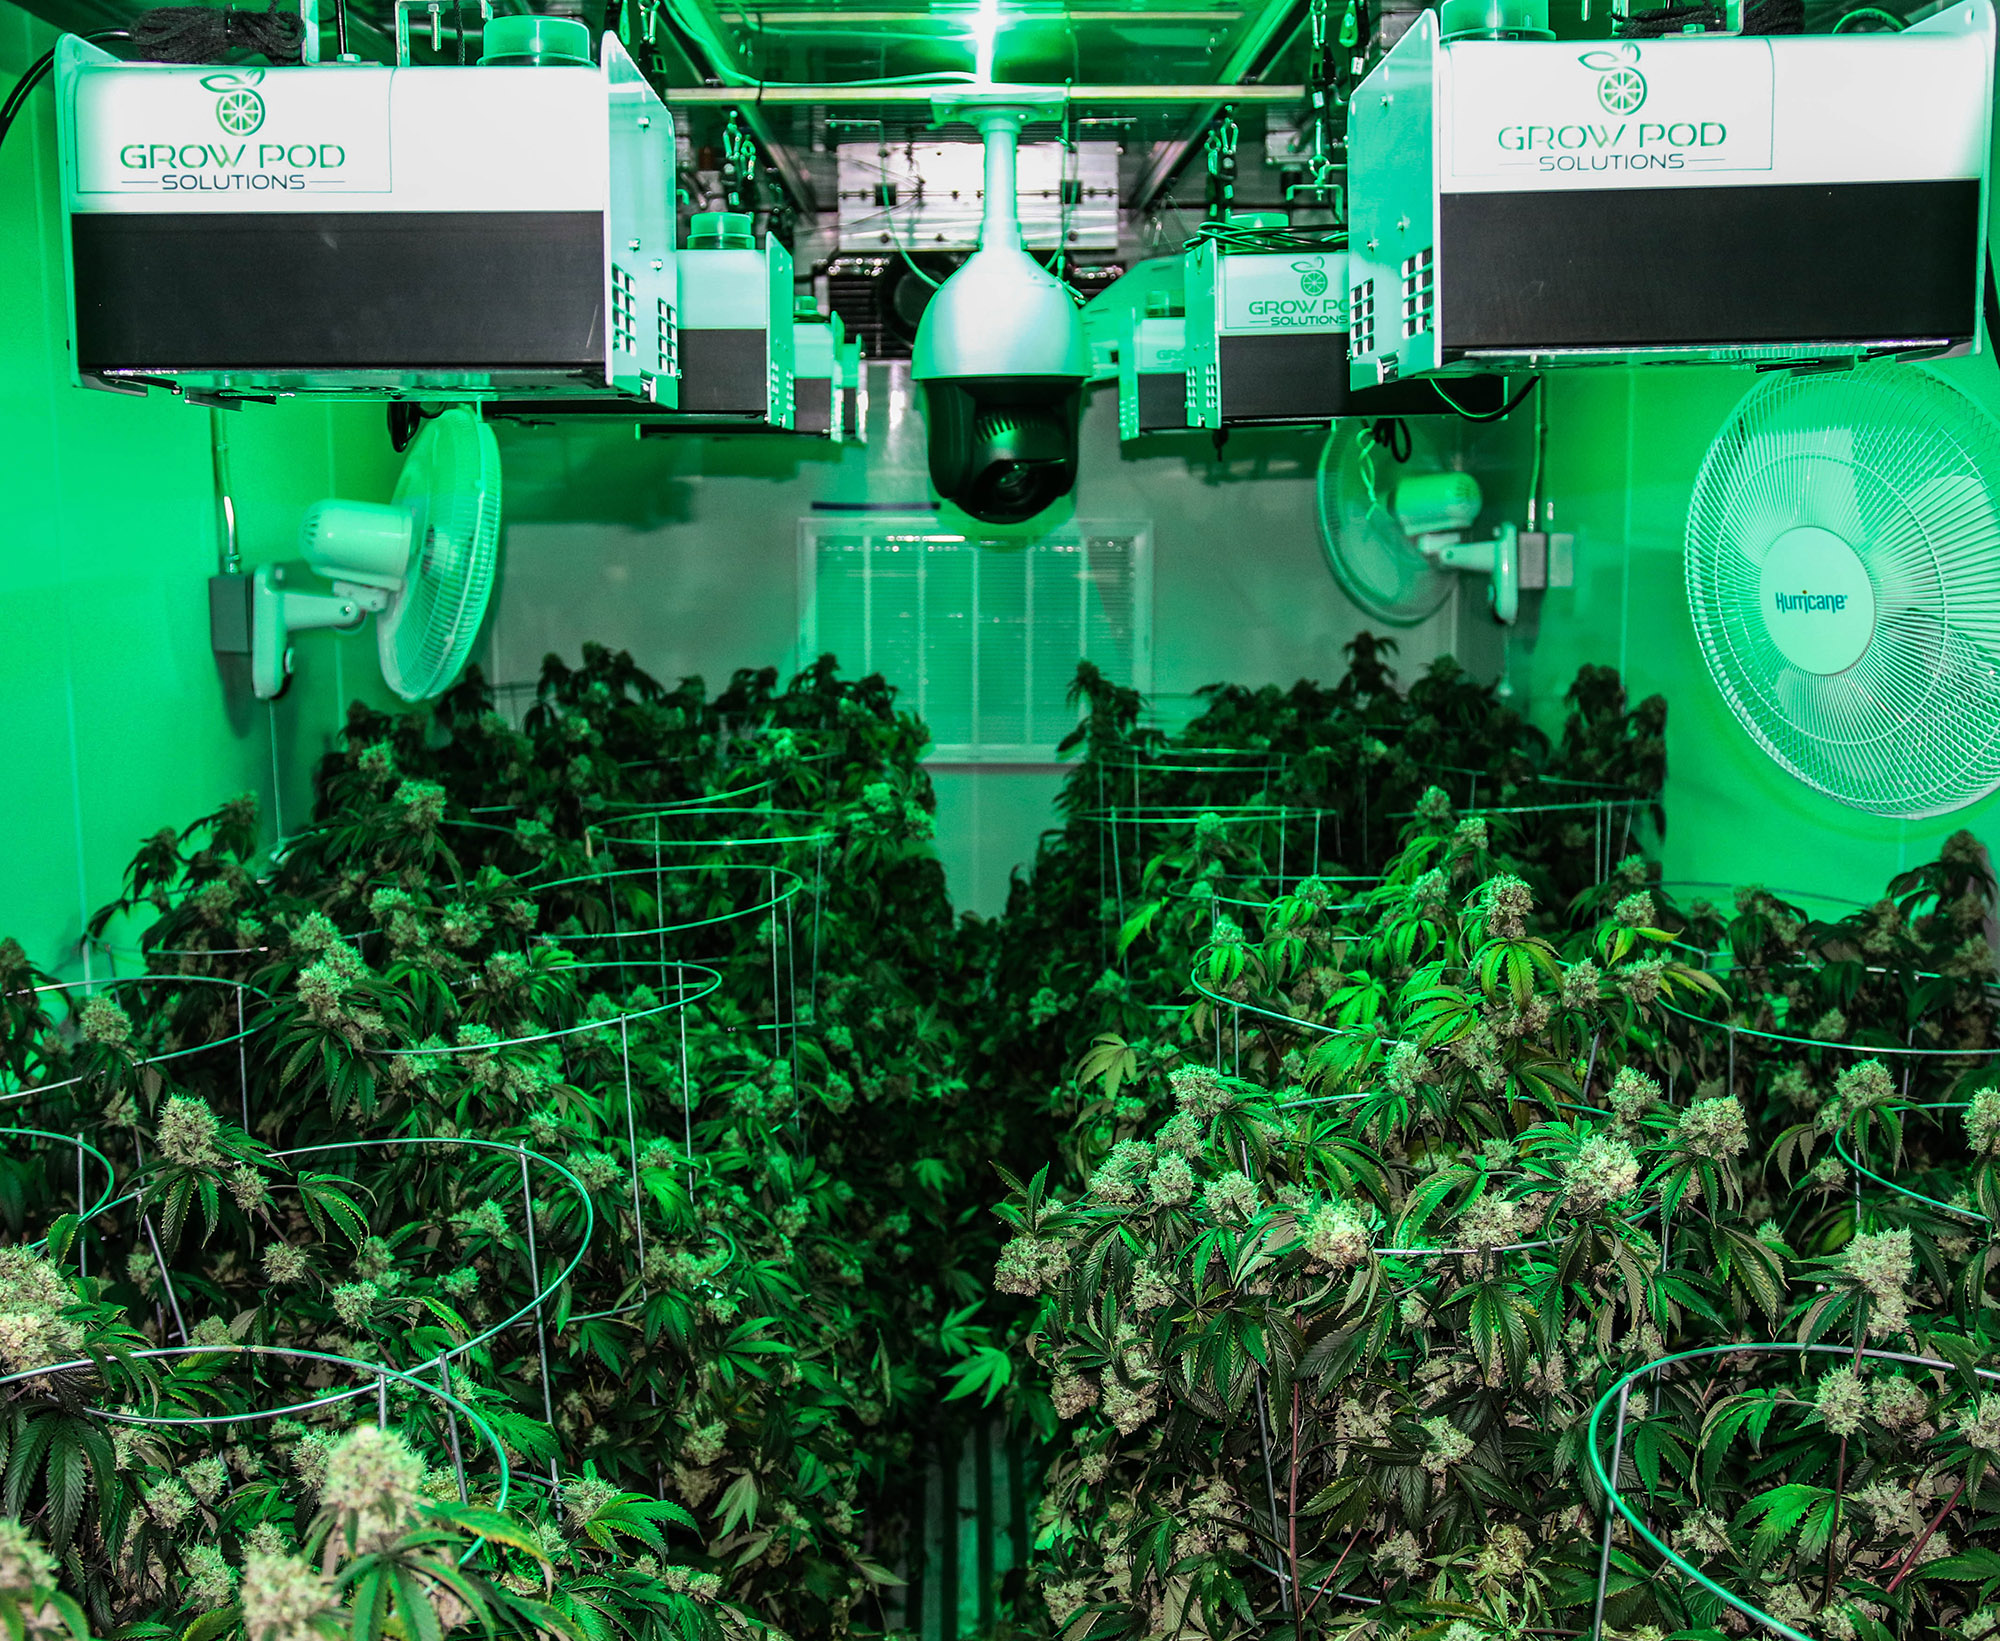 https://www.microlabfarms.com/wp-content/uploads/2020/02/growing-marijuana-in-indoor-shipping-rooms-guide-micro-lab-farms.jpg